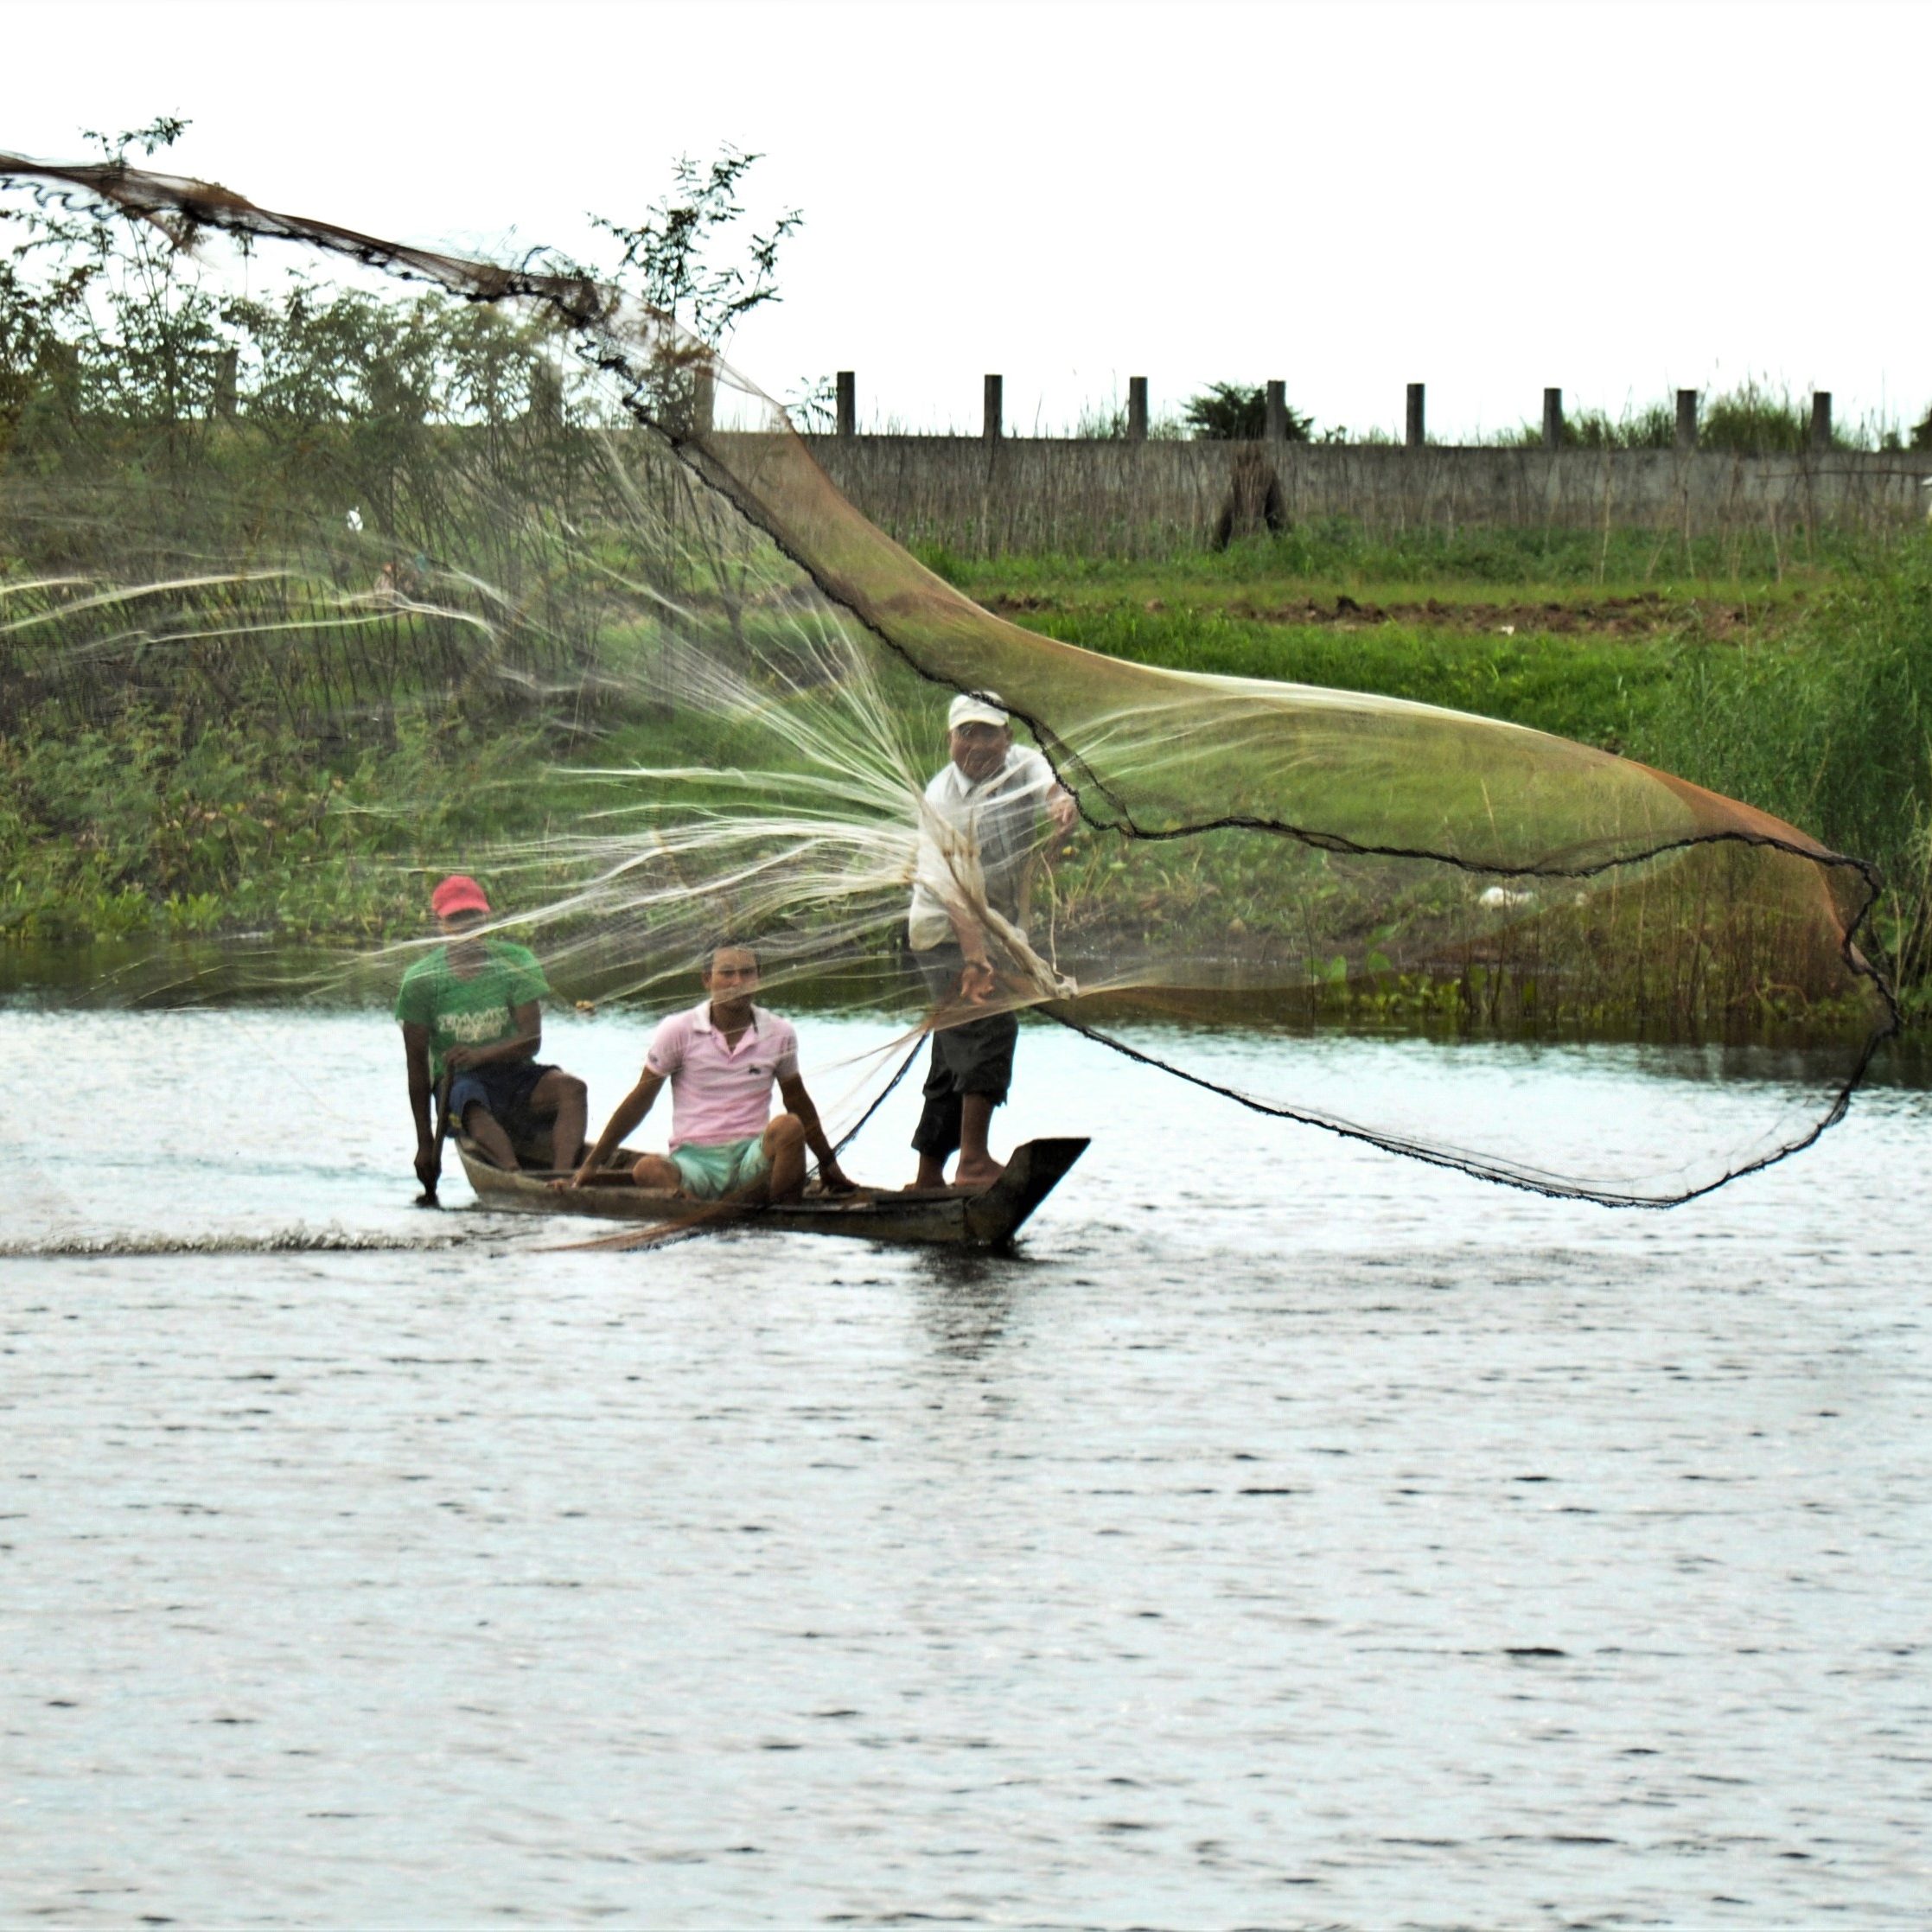 Three fisherman in a canoe casting a hand net 